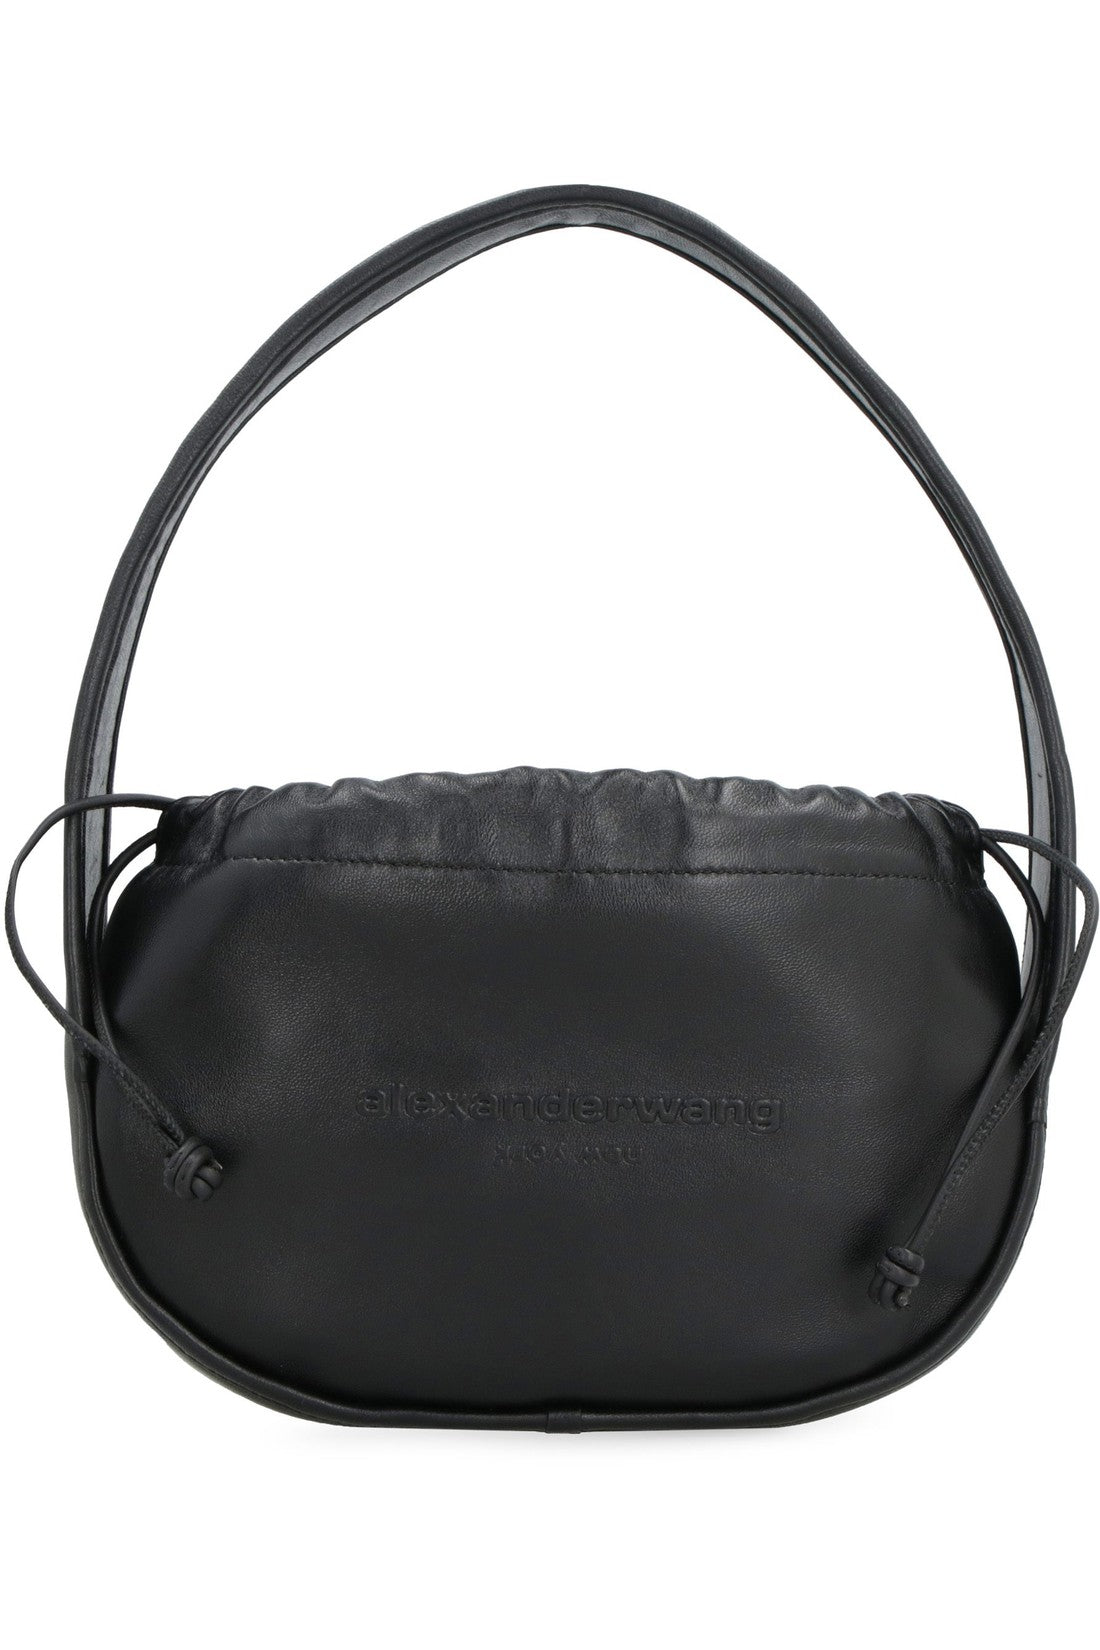 Alexander Wang-OUTLET-SALE-Cinch leather small hobo bag-ARCHIVIST